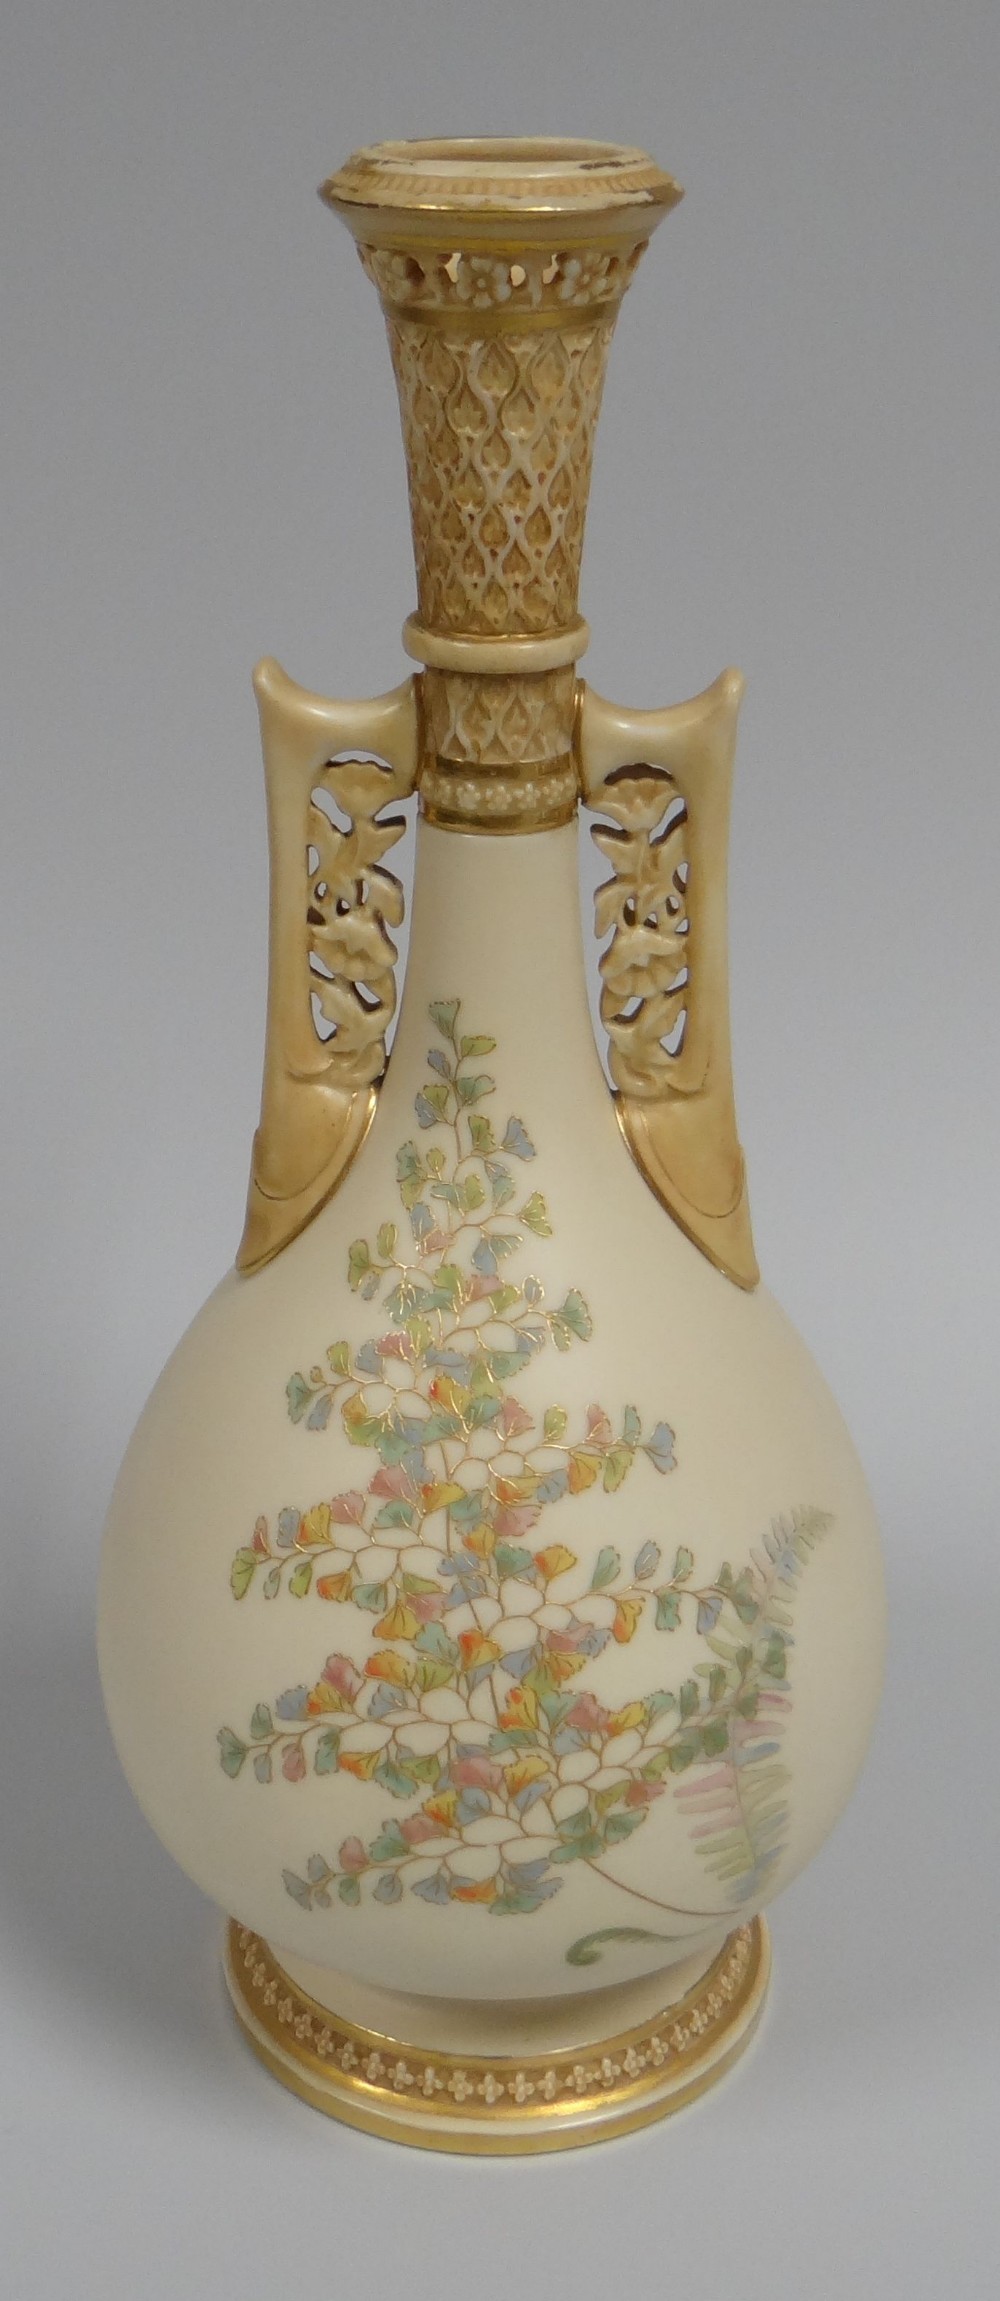 A ROYAL WORCESTER TWIN HANDLED VASE with narrow neck and openwork to the neck and handles on a